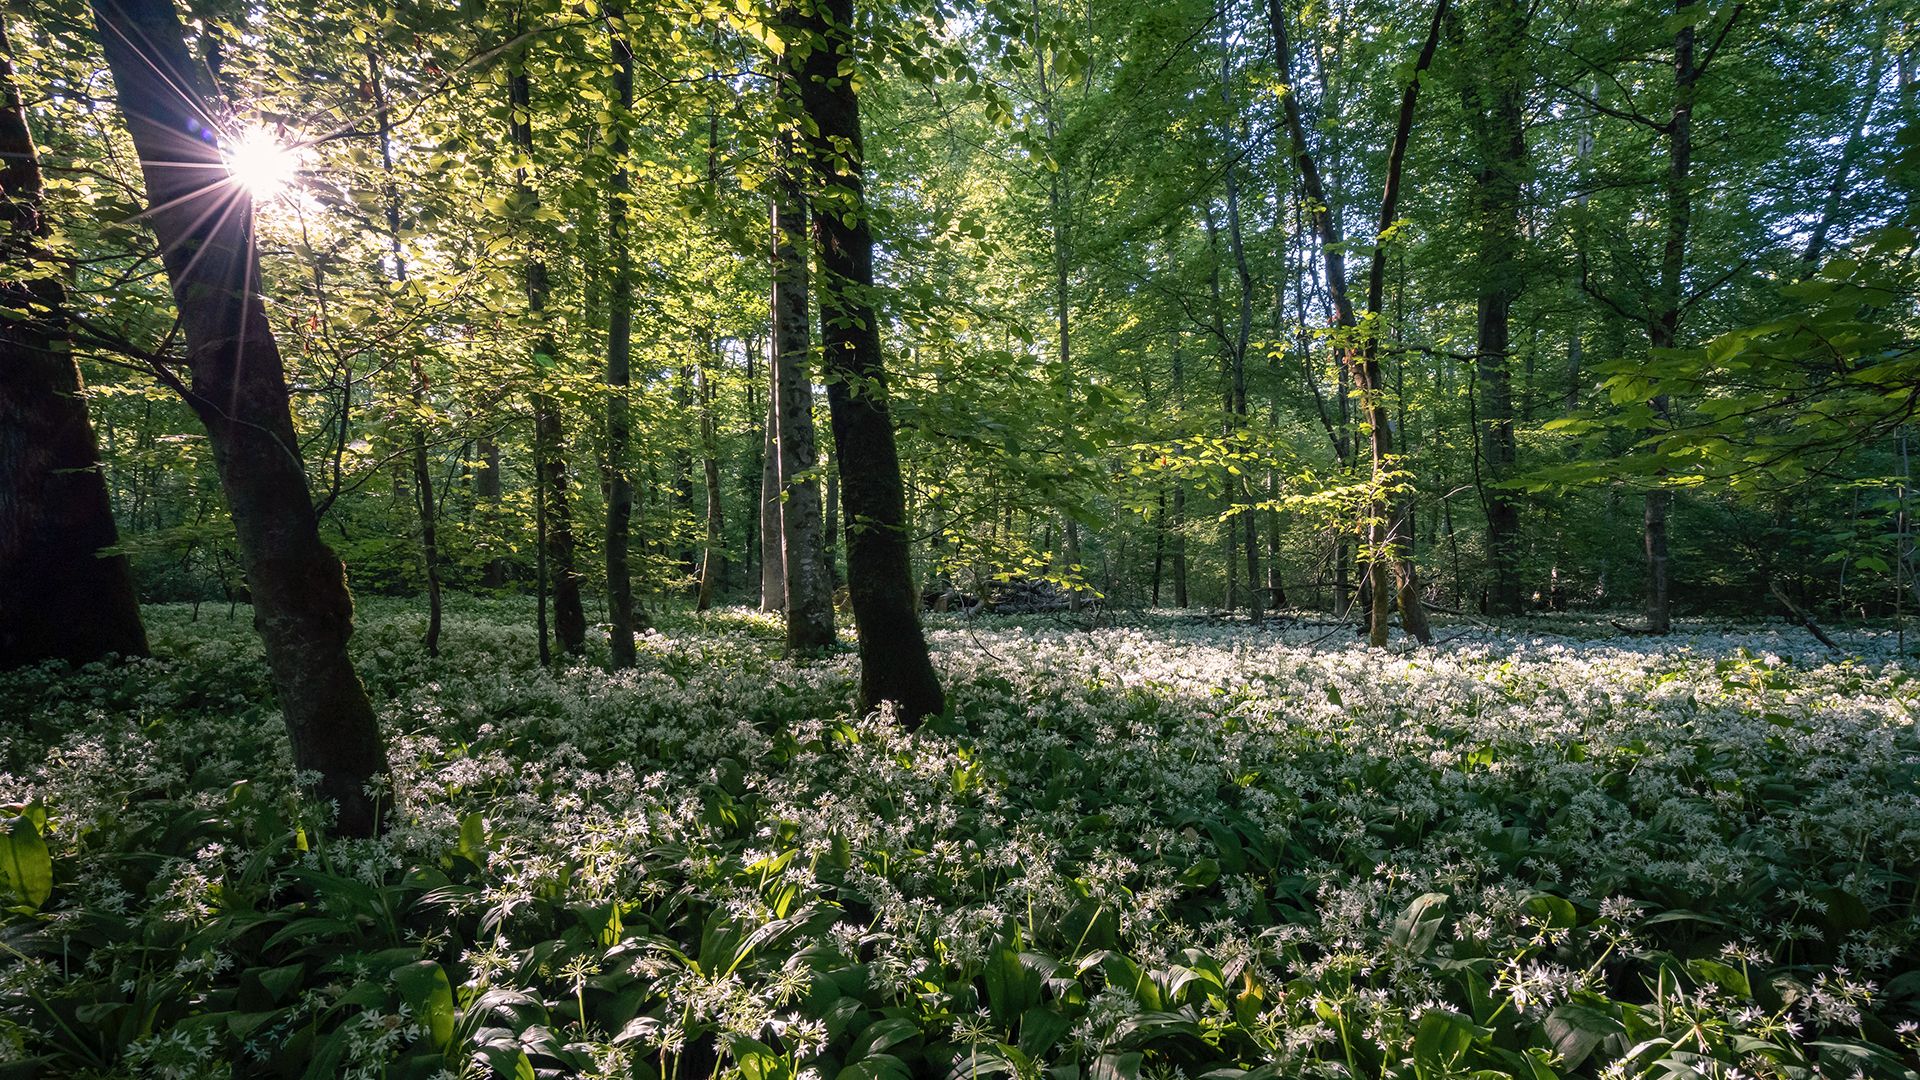 A forest with a blanket of wild garlic on the floor